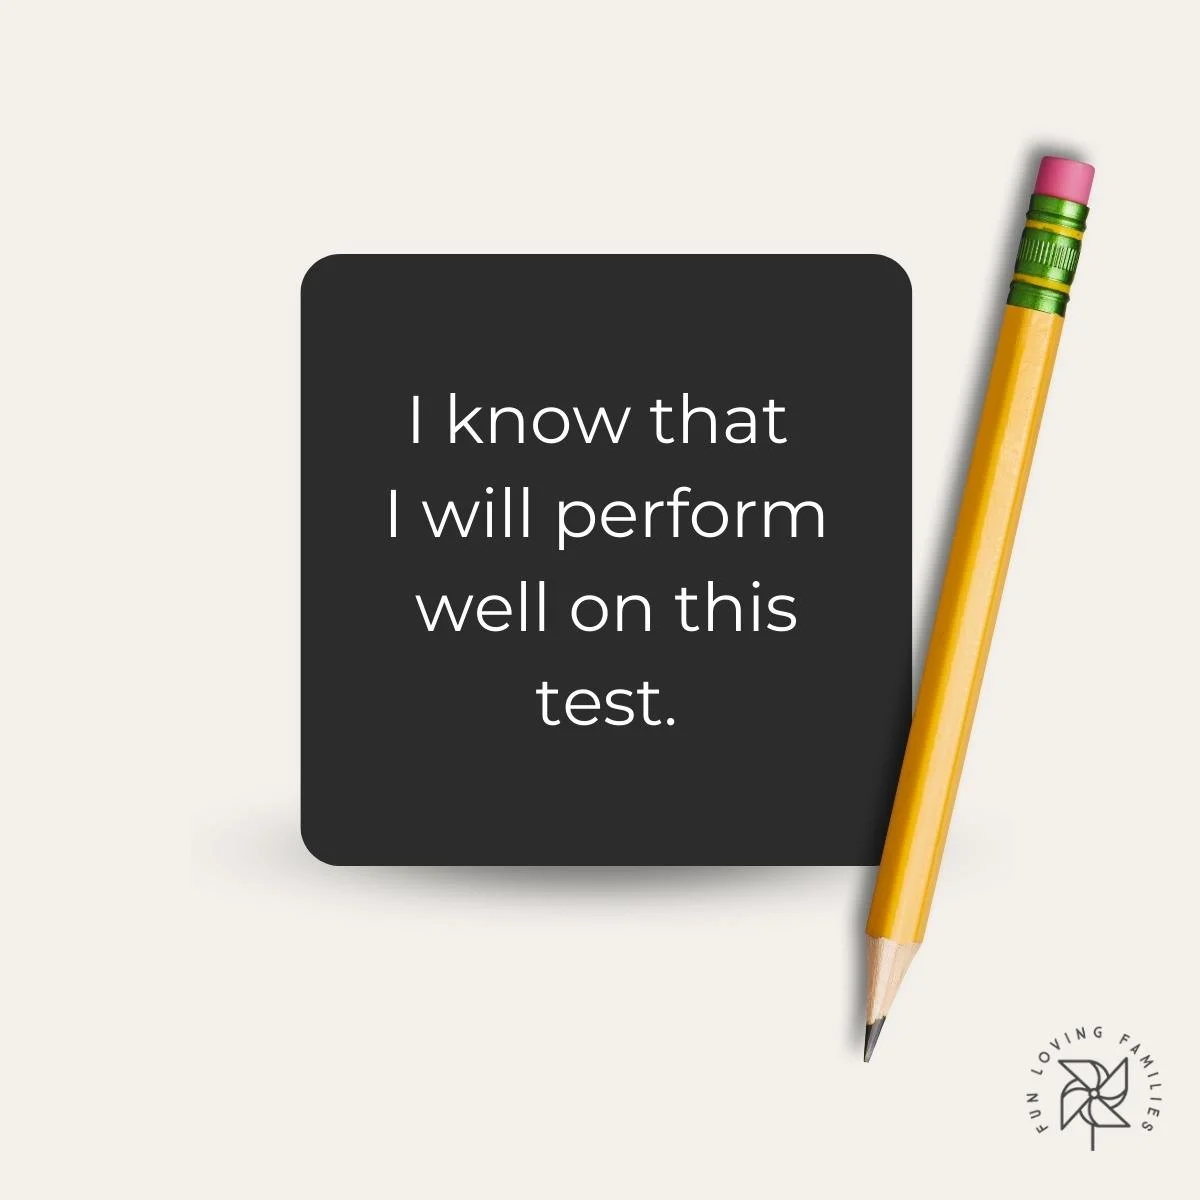 I know that I will perform well on this test affirmation